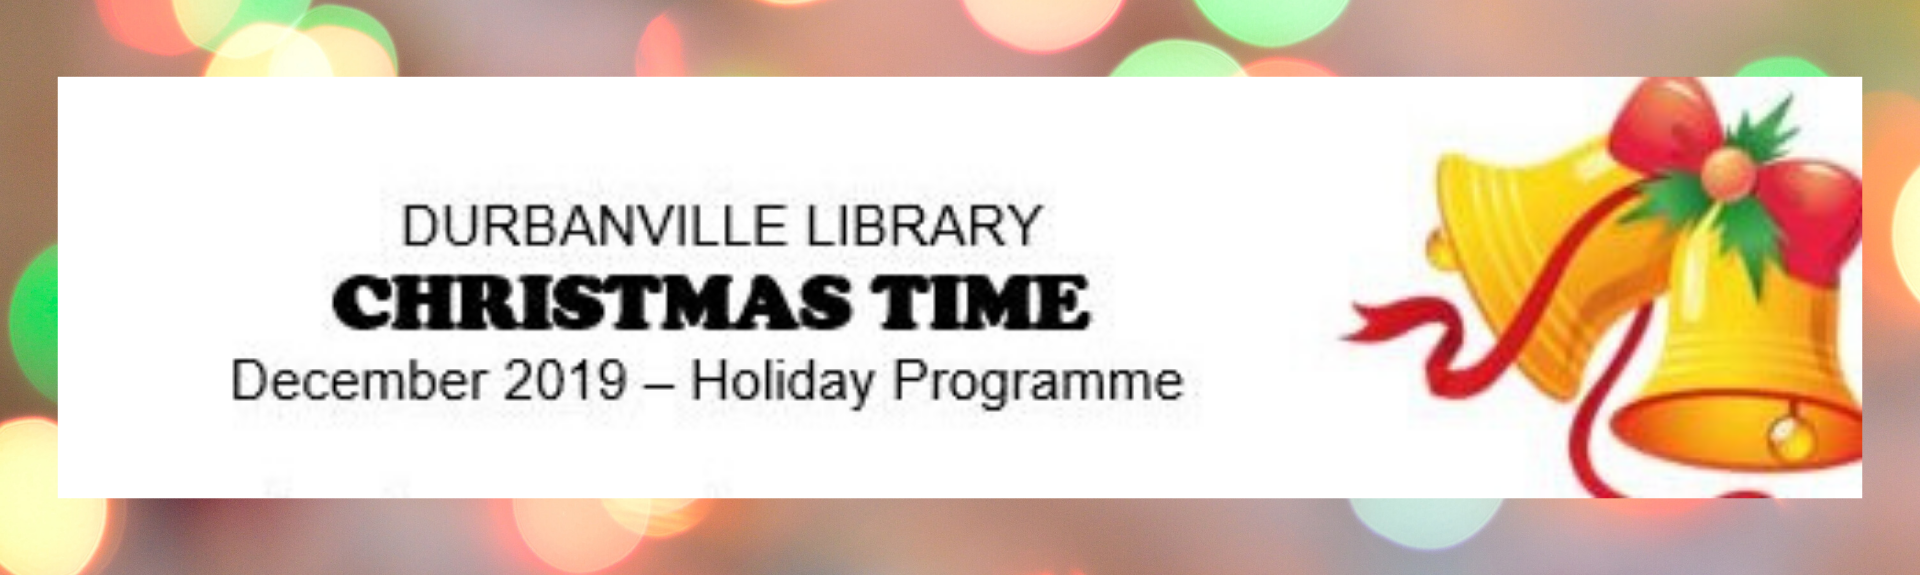 Durbanville Library Holiday Programme 2019